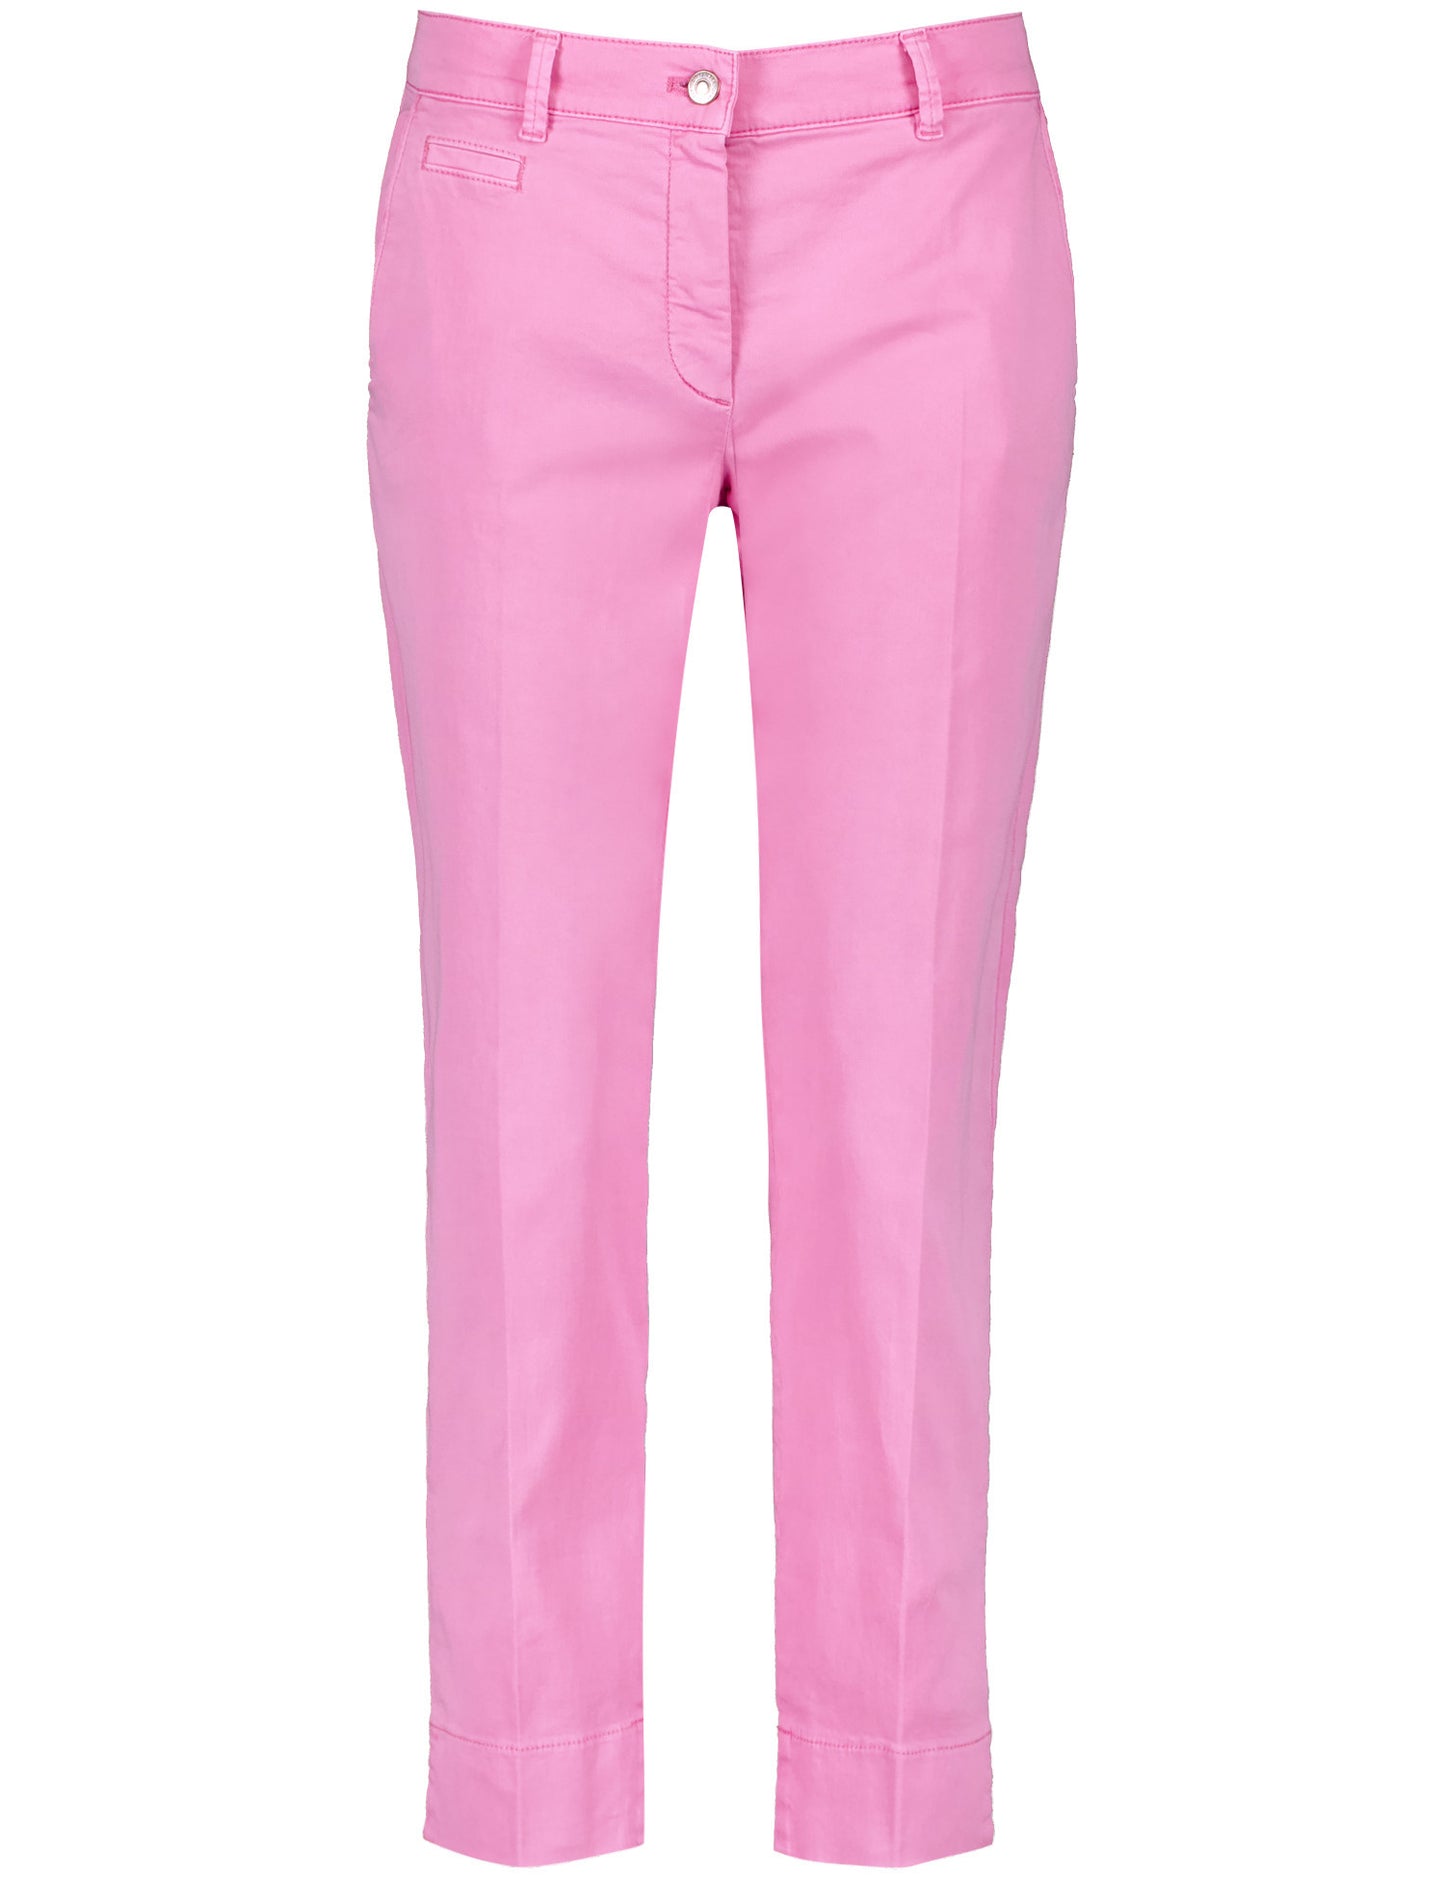 Gerry Weber Kirsty Citystyle Cotton Trouser